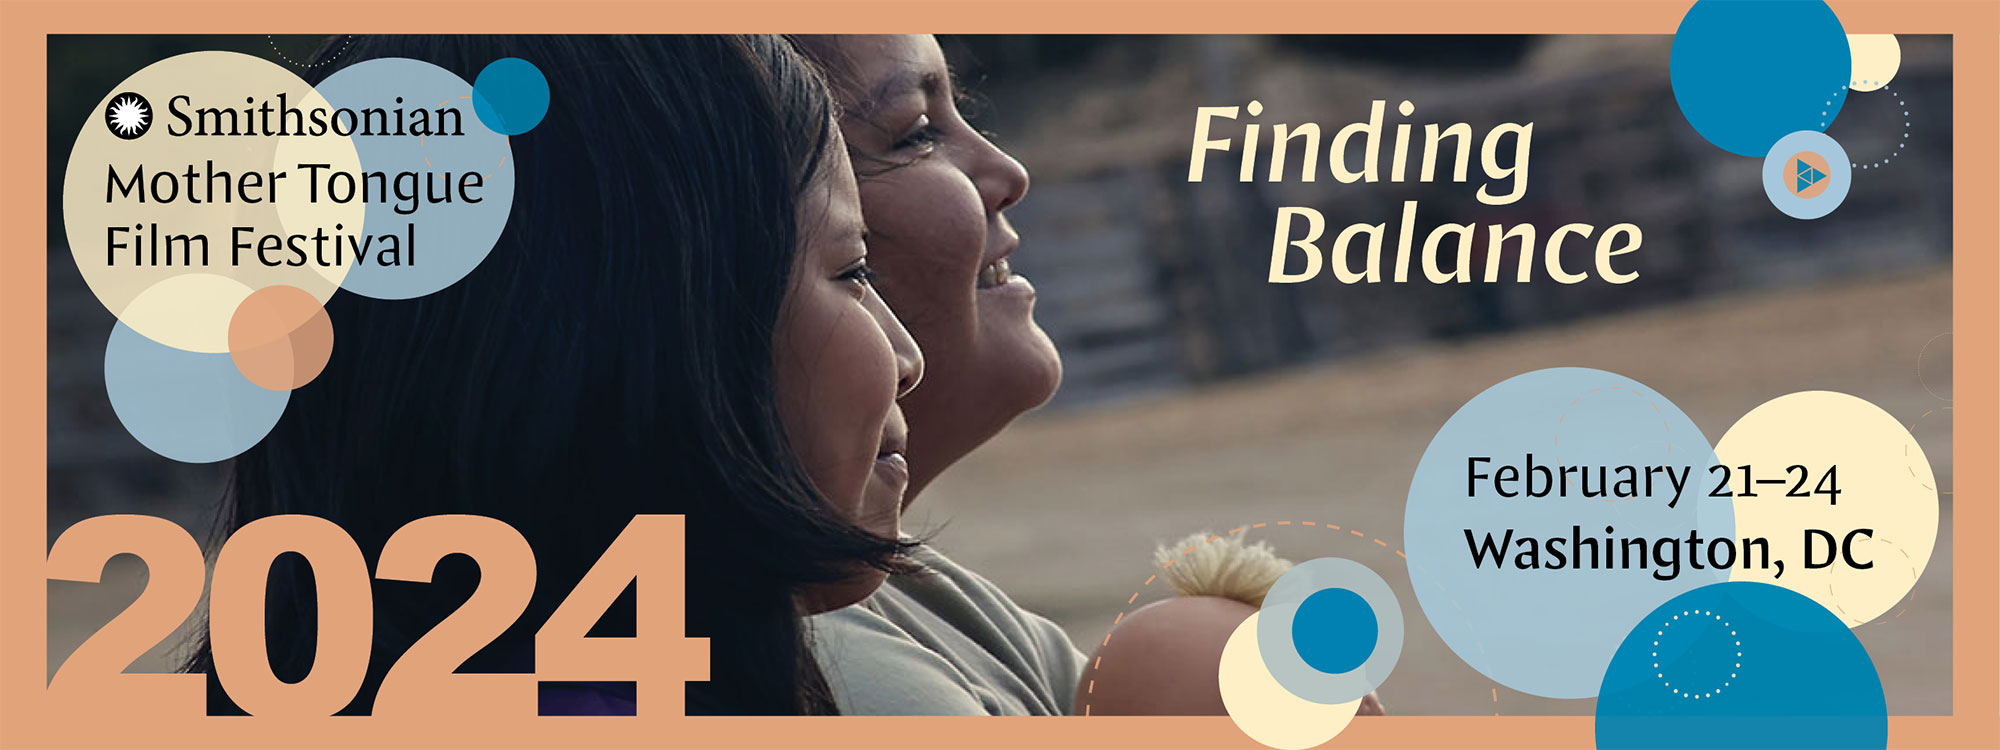 Banner for the 2024 Smithsonian Mother Tongue Film Festival, "Finding Balance" featuring two smiling girls